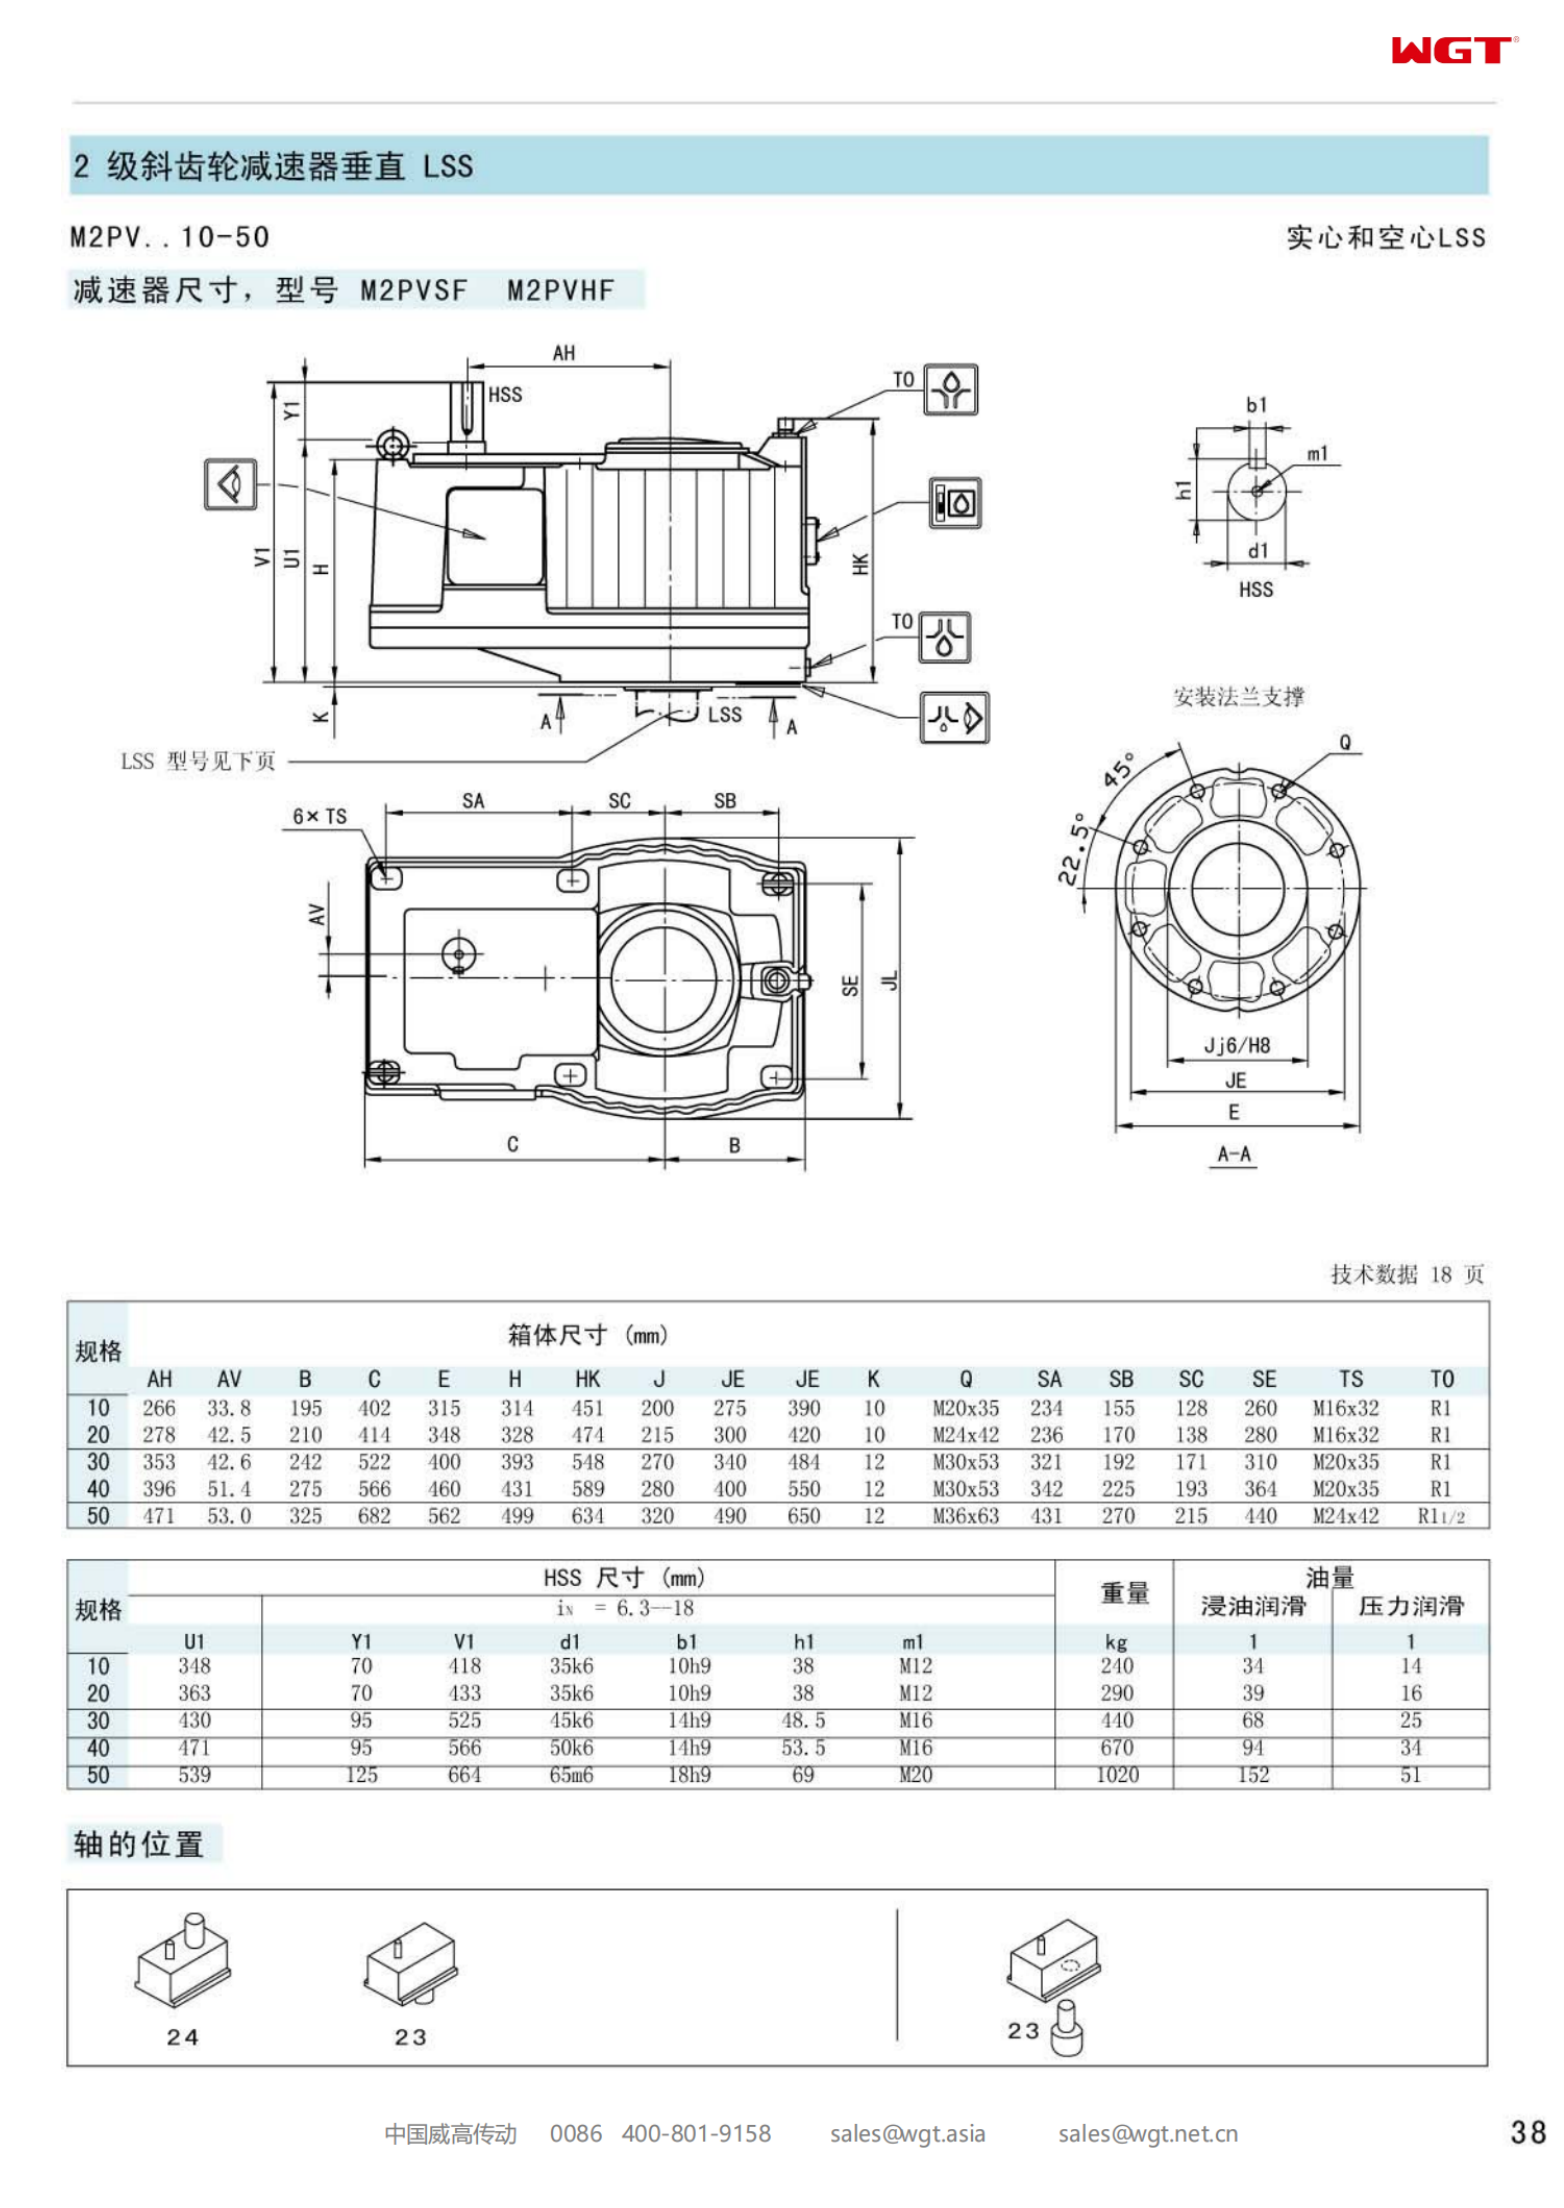 M2PVHF30 Replace_SEW_M_Series Gearbox